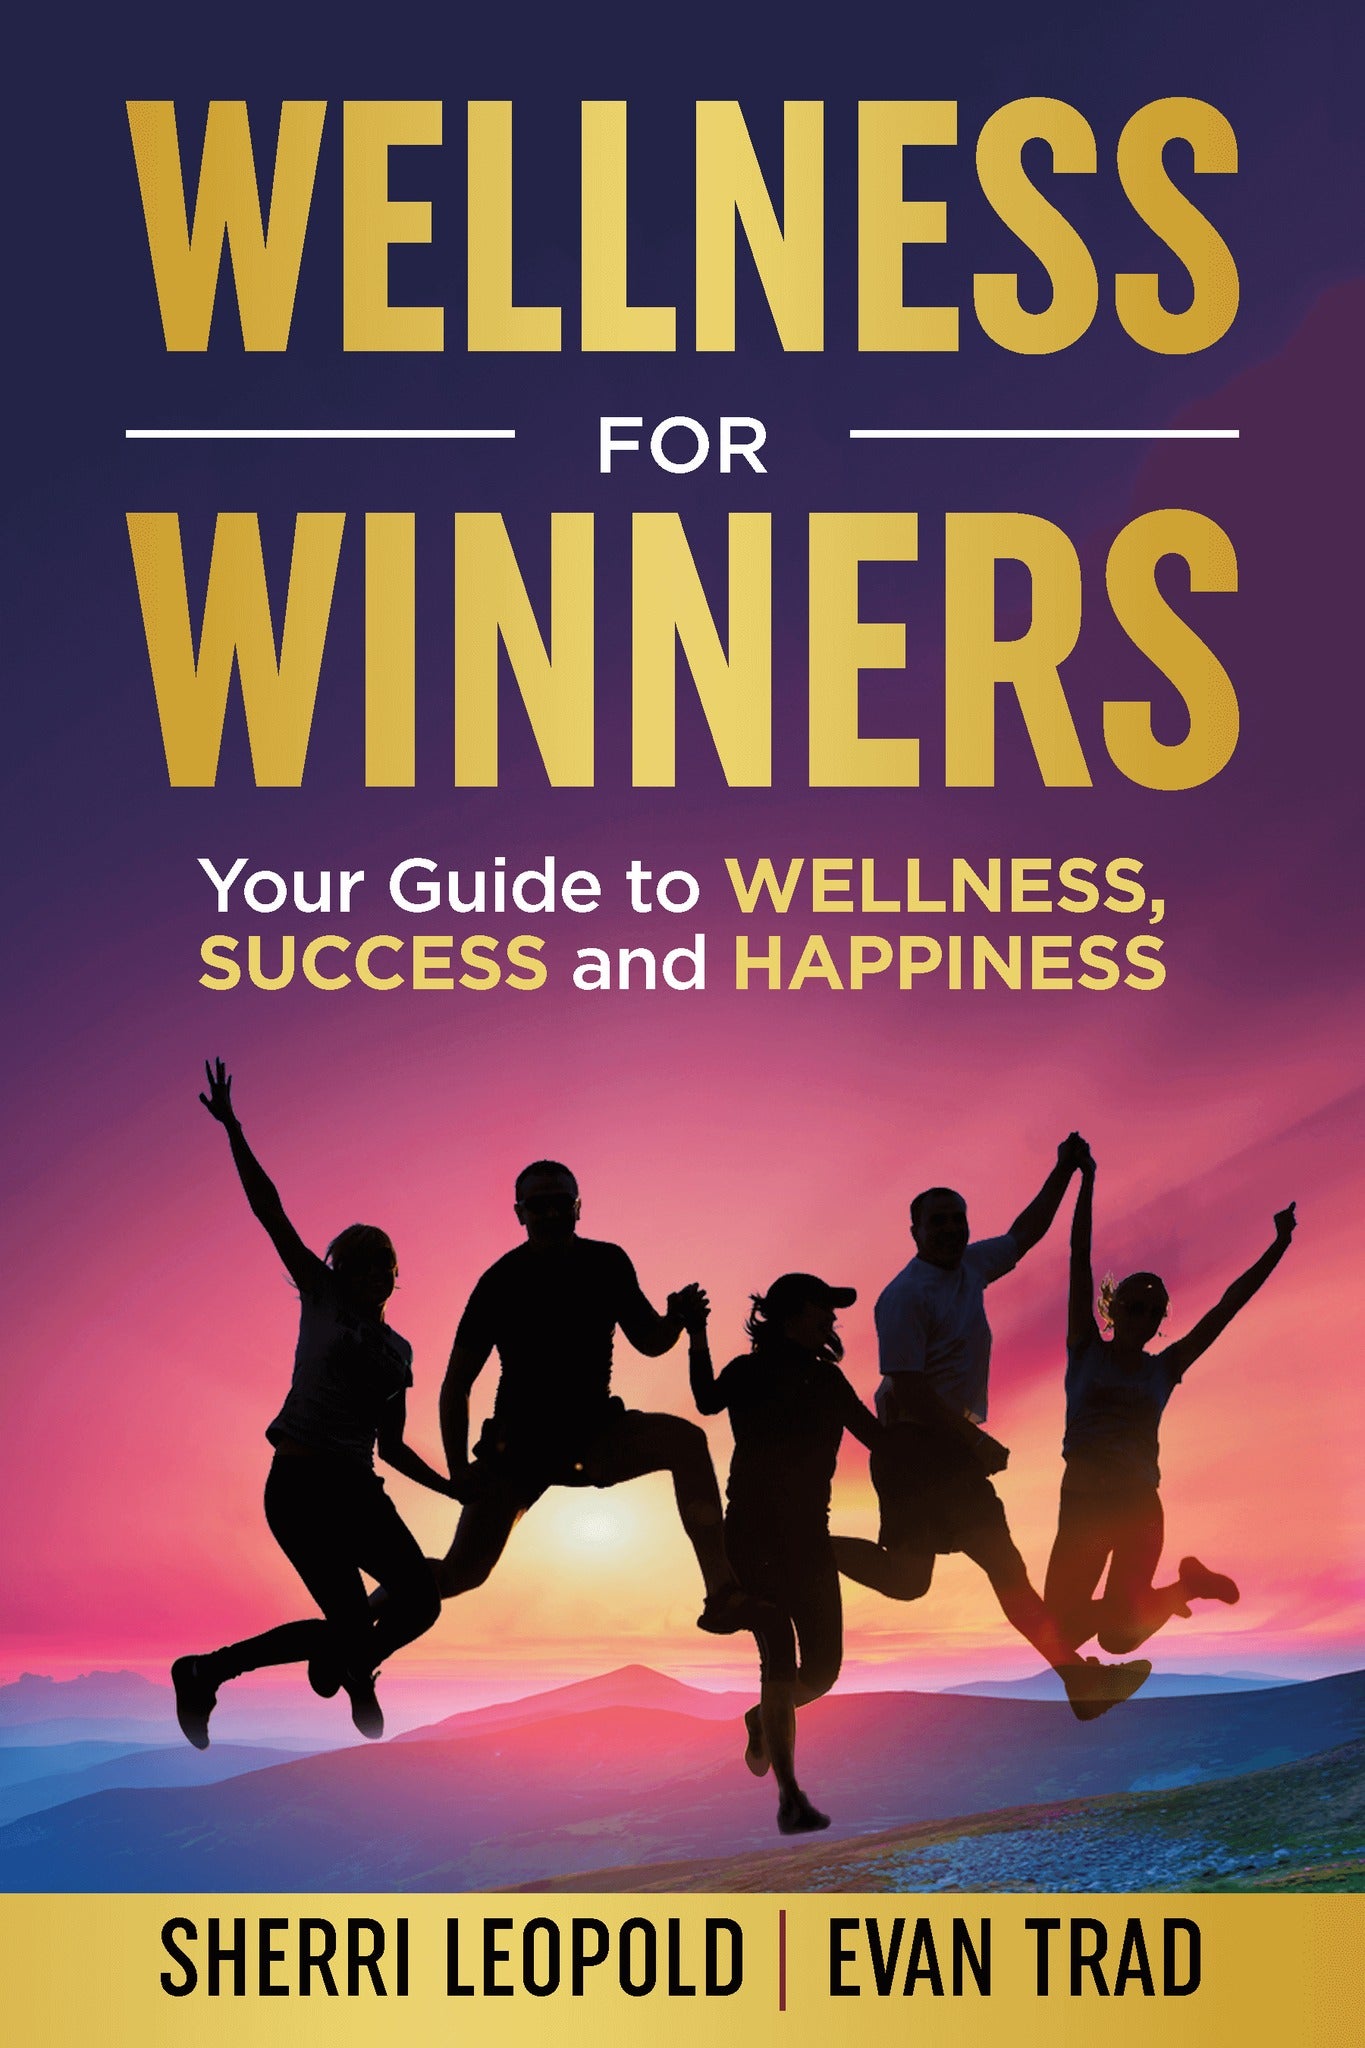 Wellness for Winners Free E-Book Happy Being Well